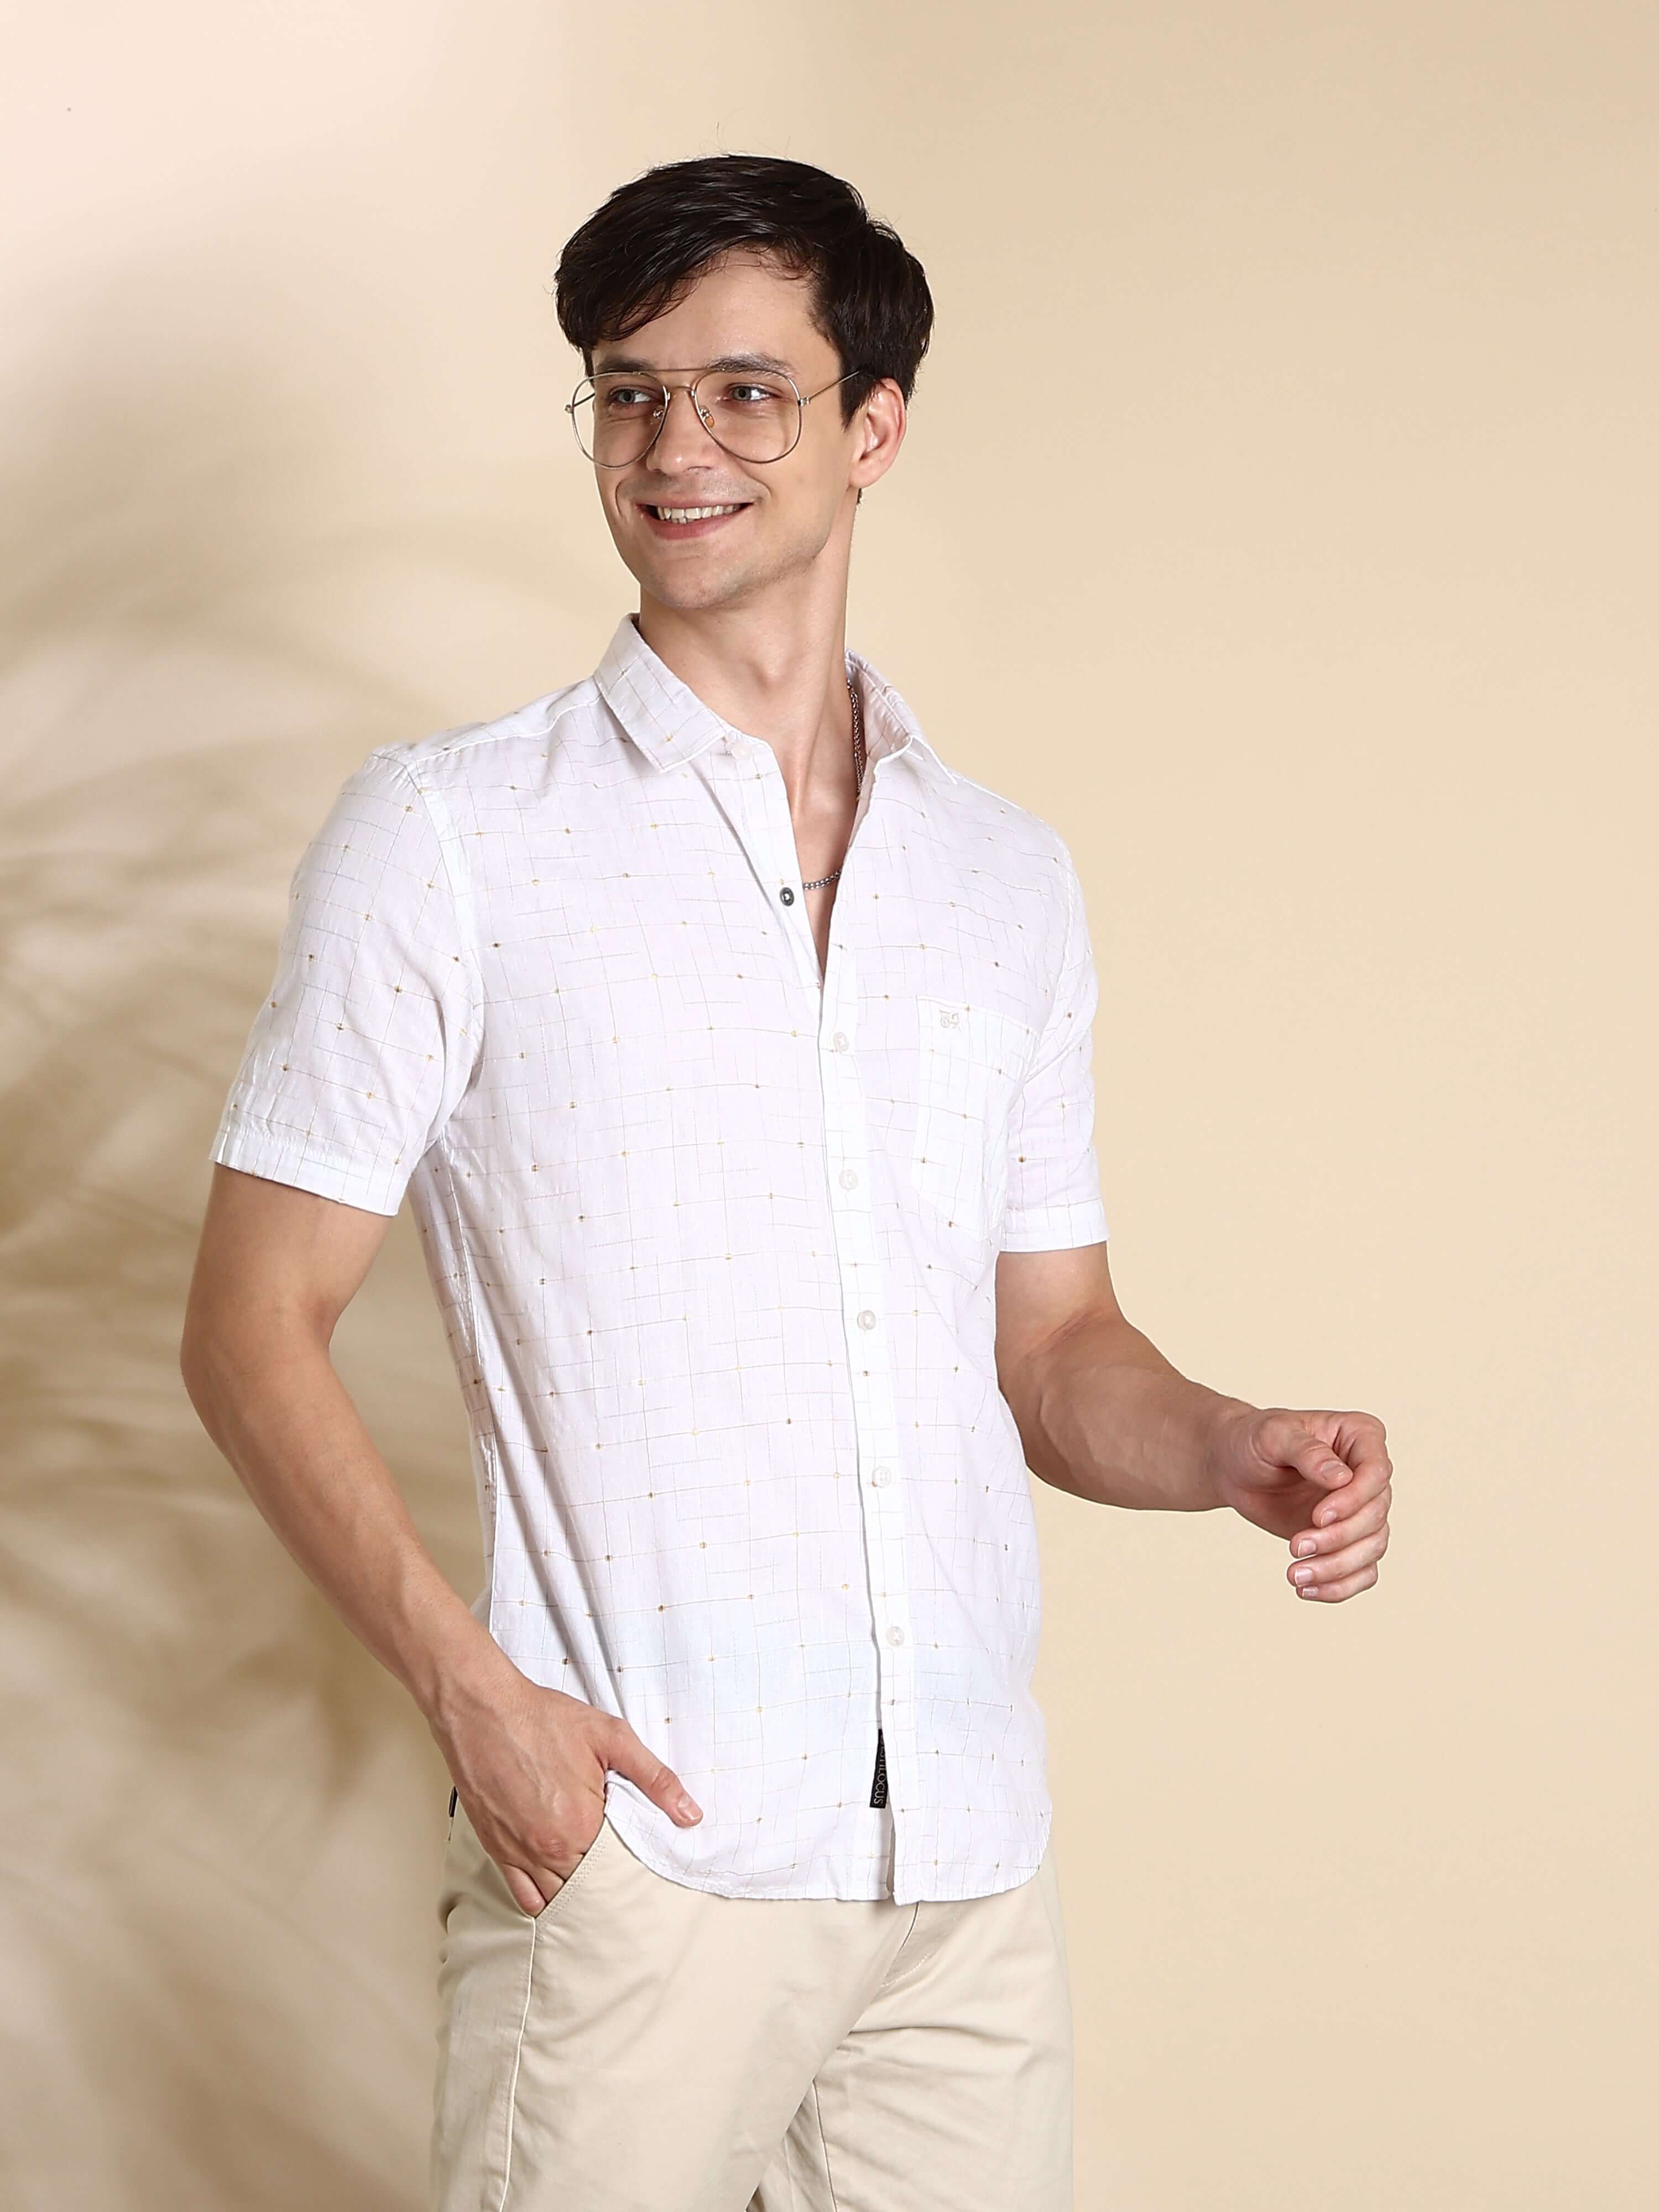 White casual check half sleeves shirt shop online at Estilocus. • Half-sleeve check shirt• Cut and sew placket• Regular collar• Single pocket with logo embroidery• Curved hemline• Finest quality sewing• Machine wash care• Suitable to wear with all types o